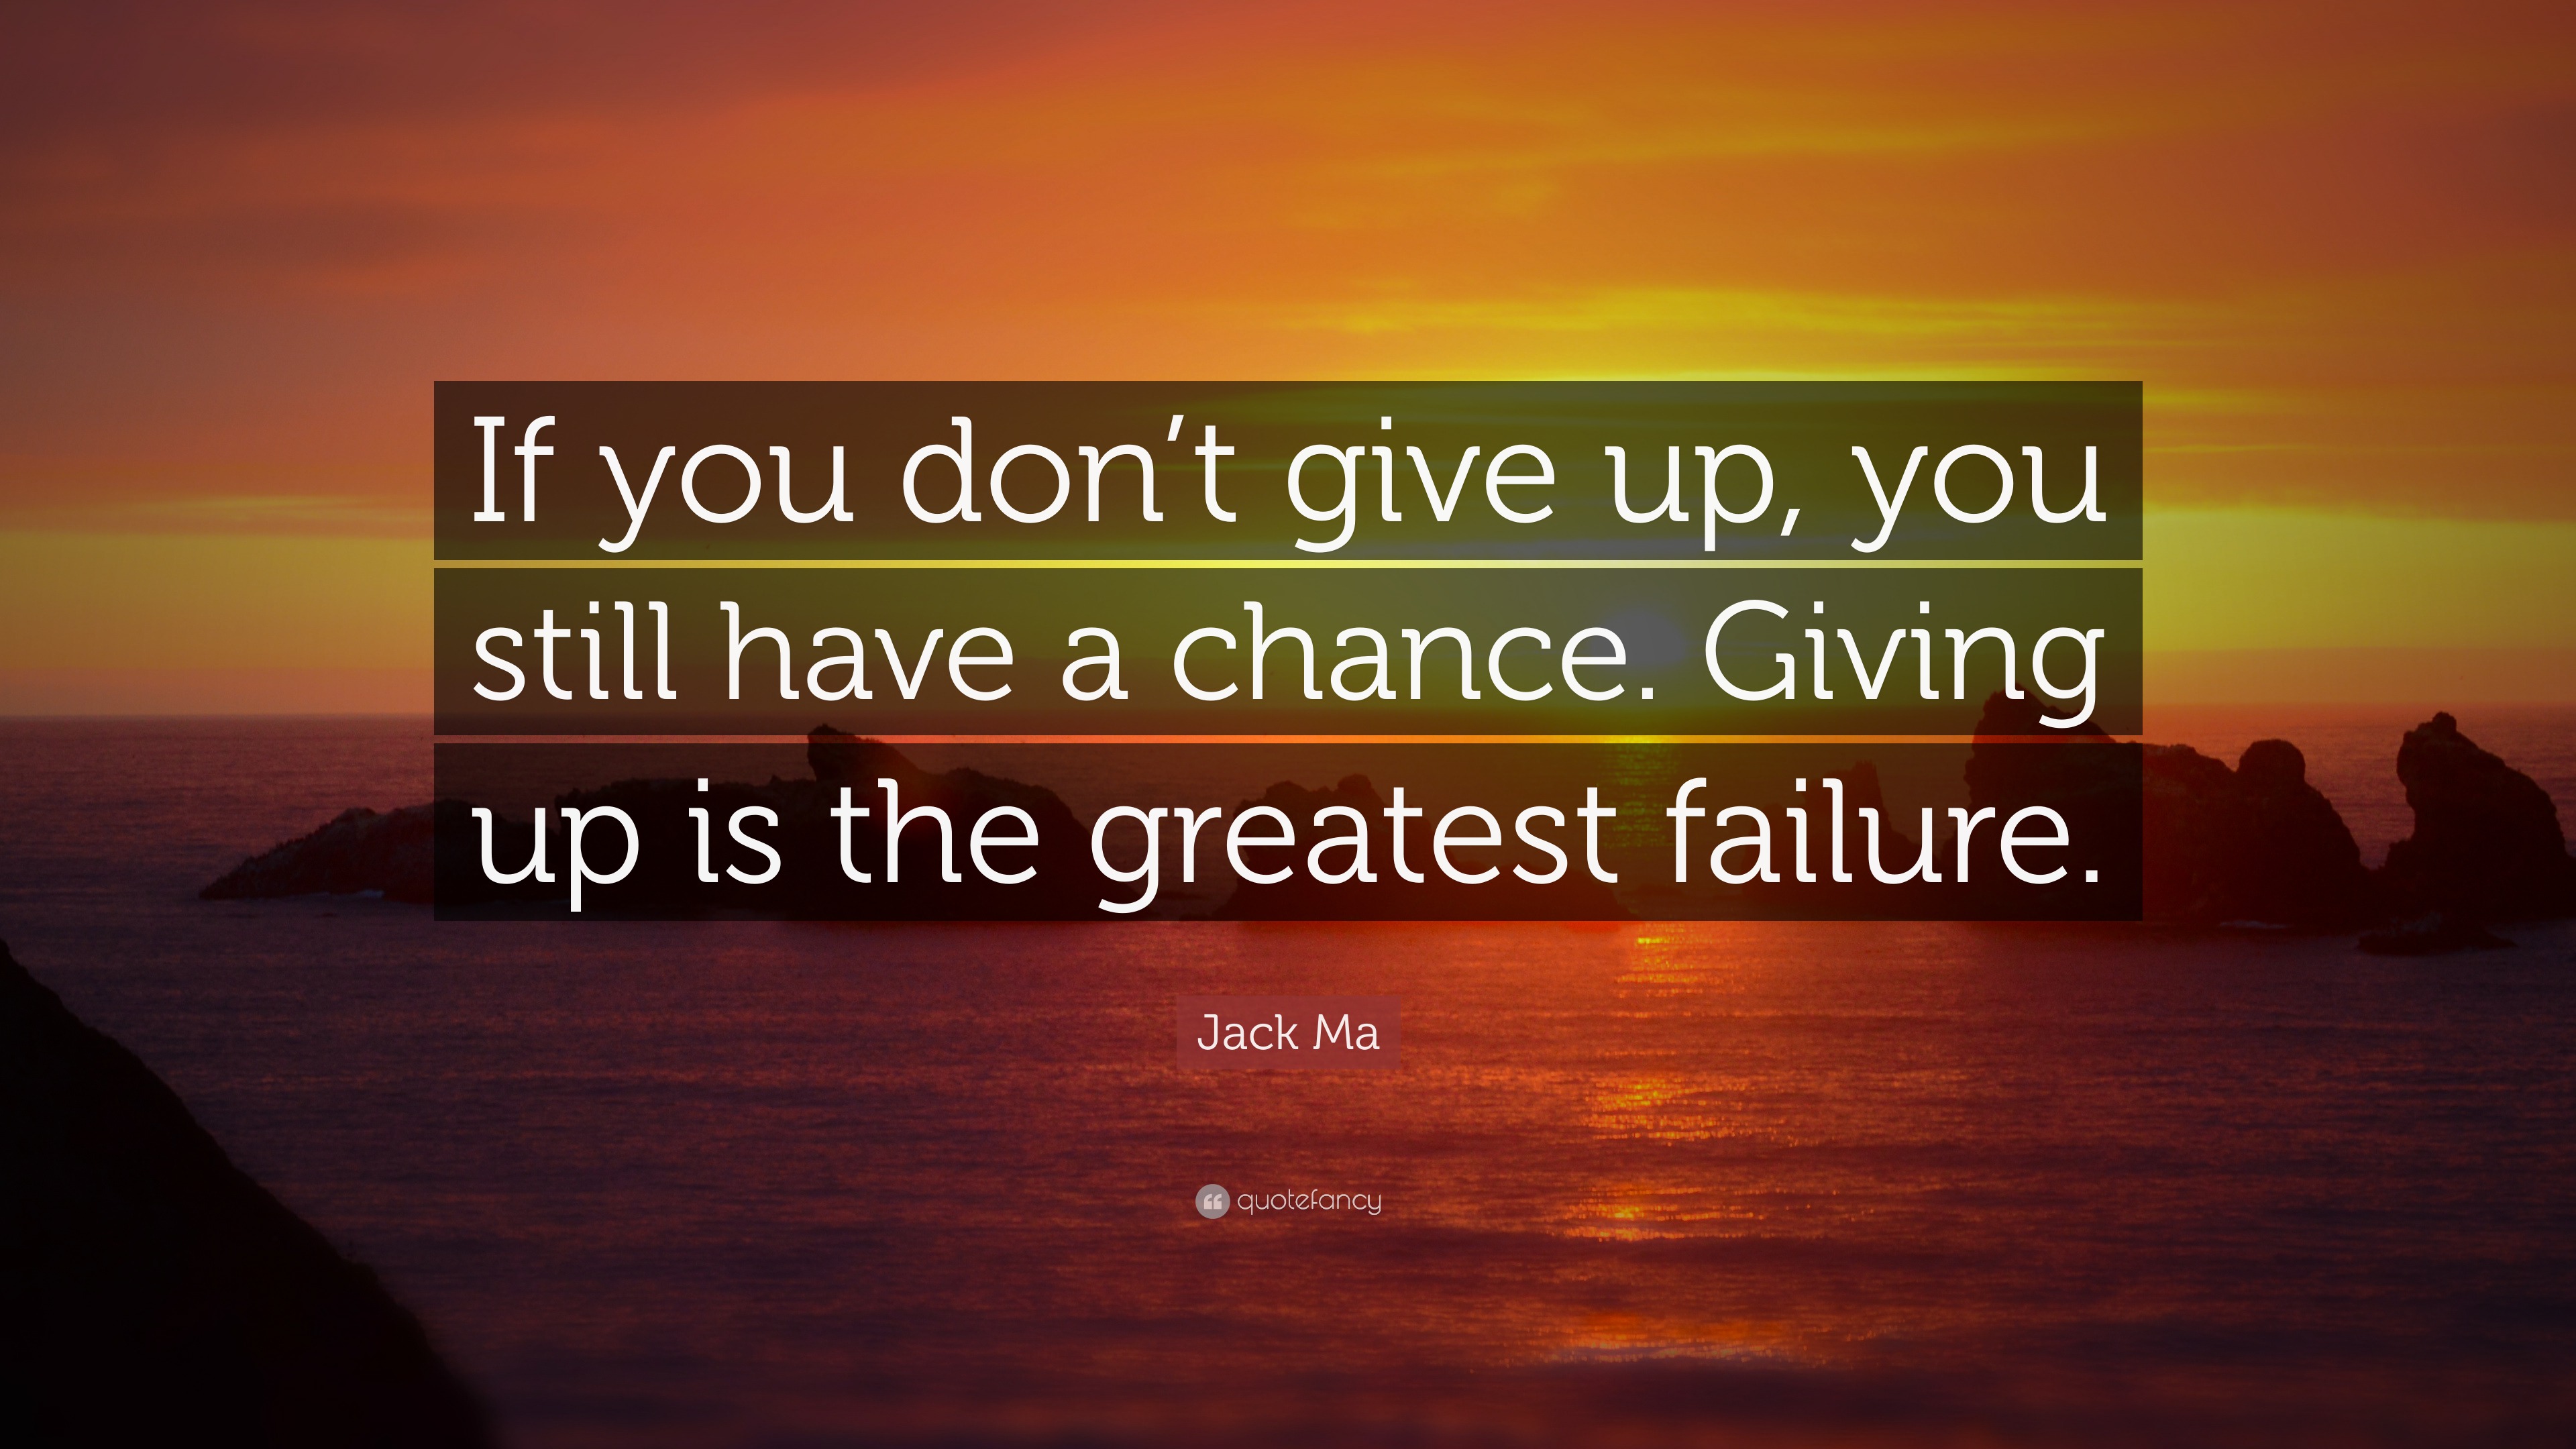 Jack Ma Quote: “If you don’t give up, you still have a chance. Giving ...